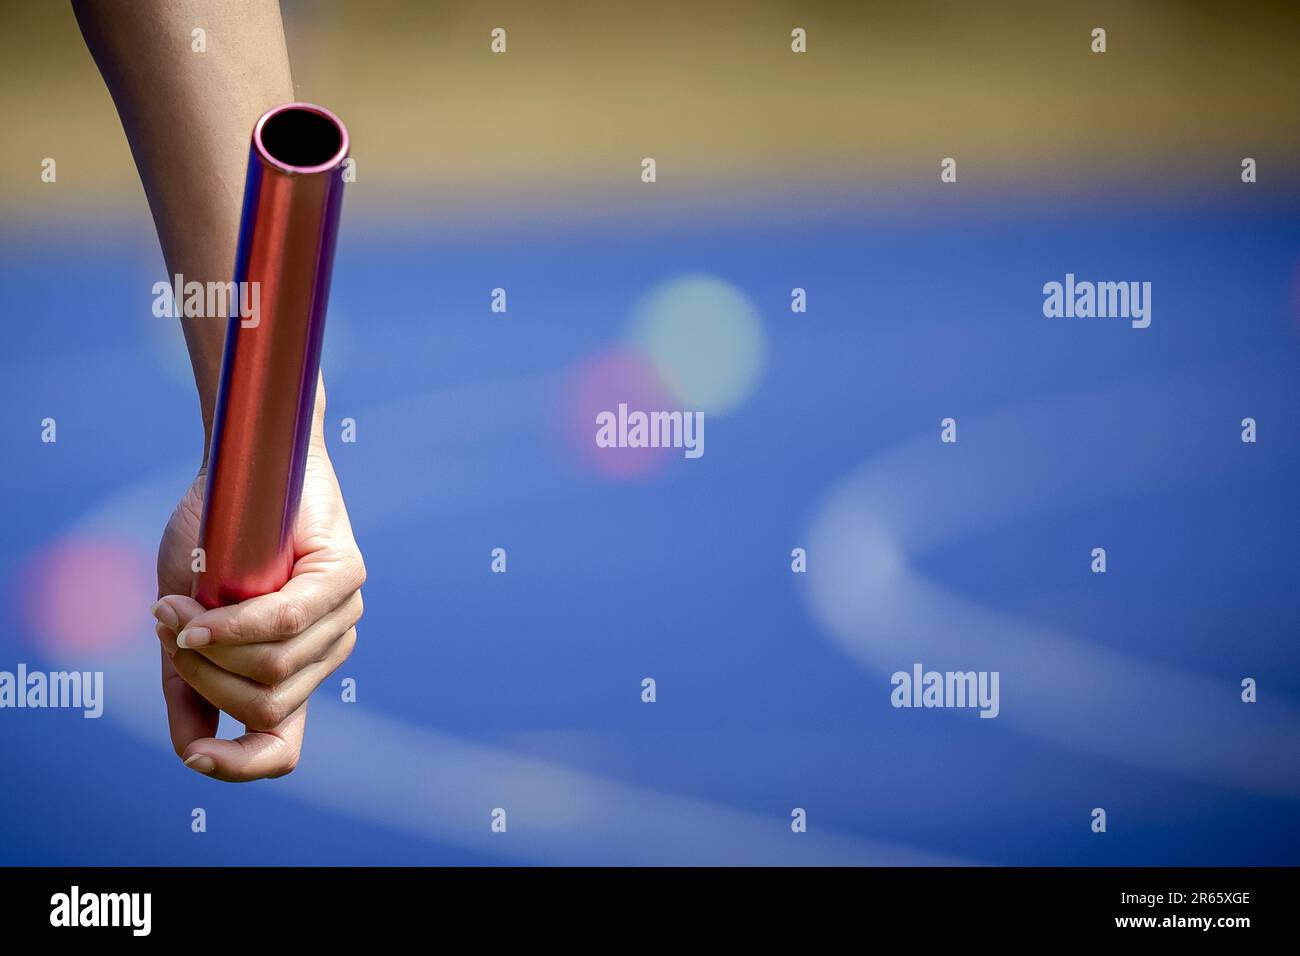 ARNHEM - A relay baton during a training of the 4x100 relay runners at Papendal. ANP ROBIN VAN LONKHUIJSEN Stock Photo